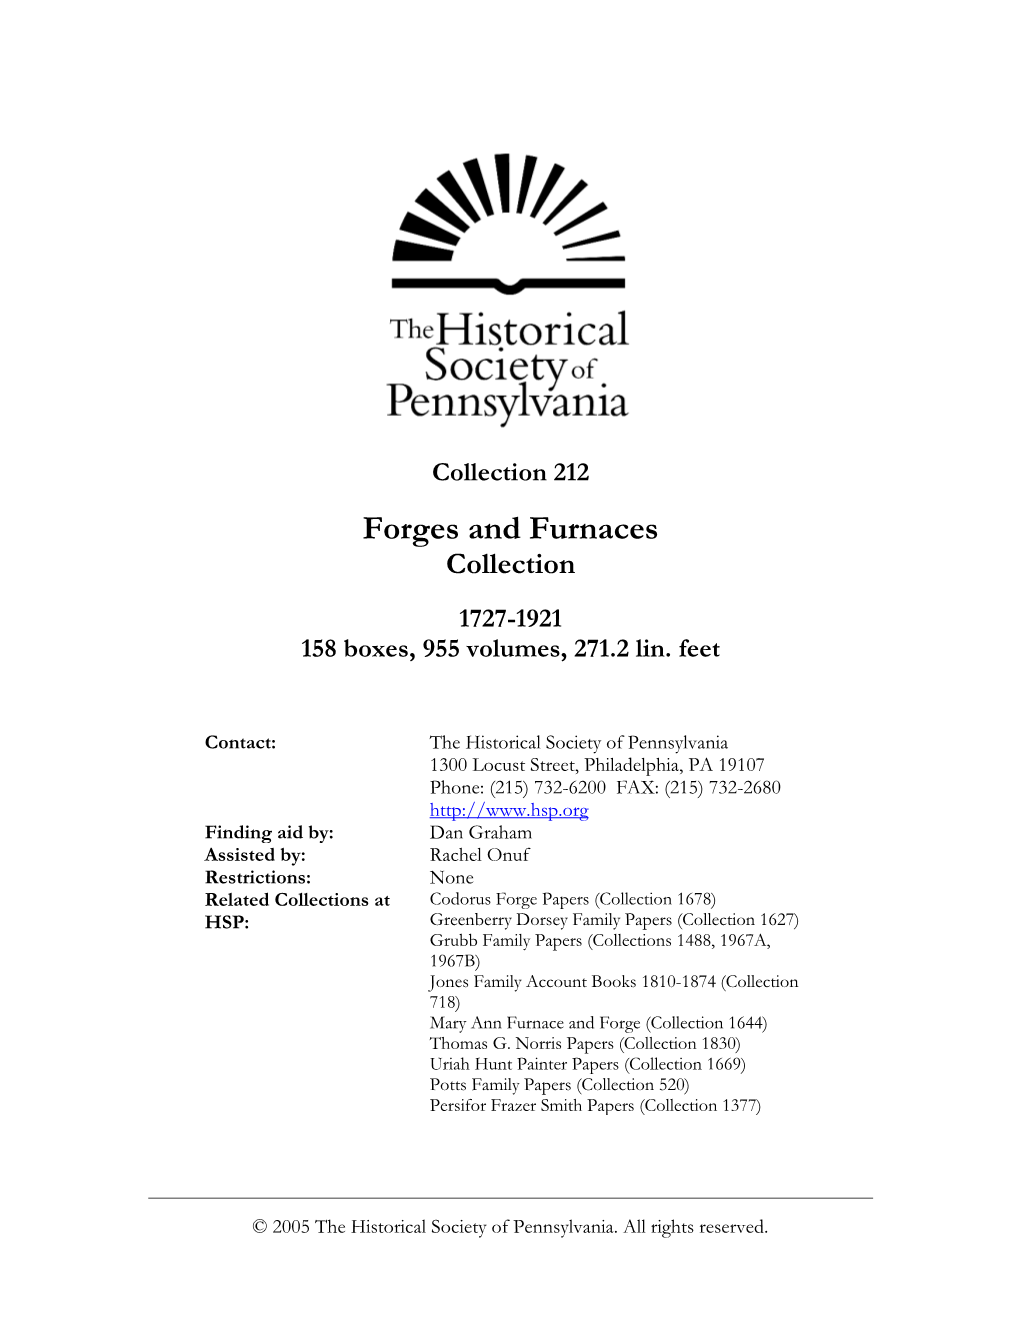 Forges and Furnaces Collection